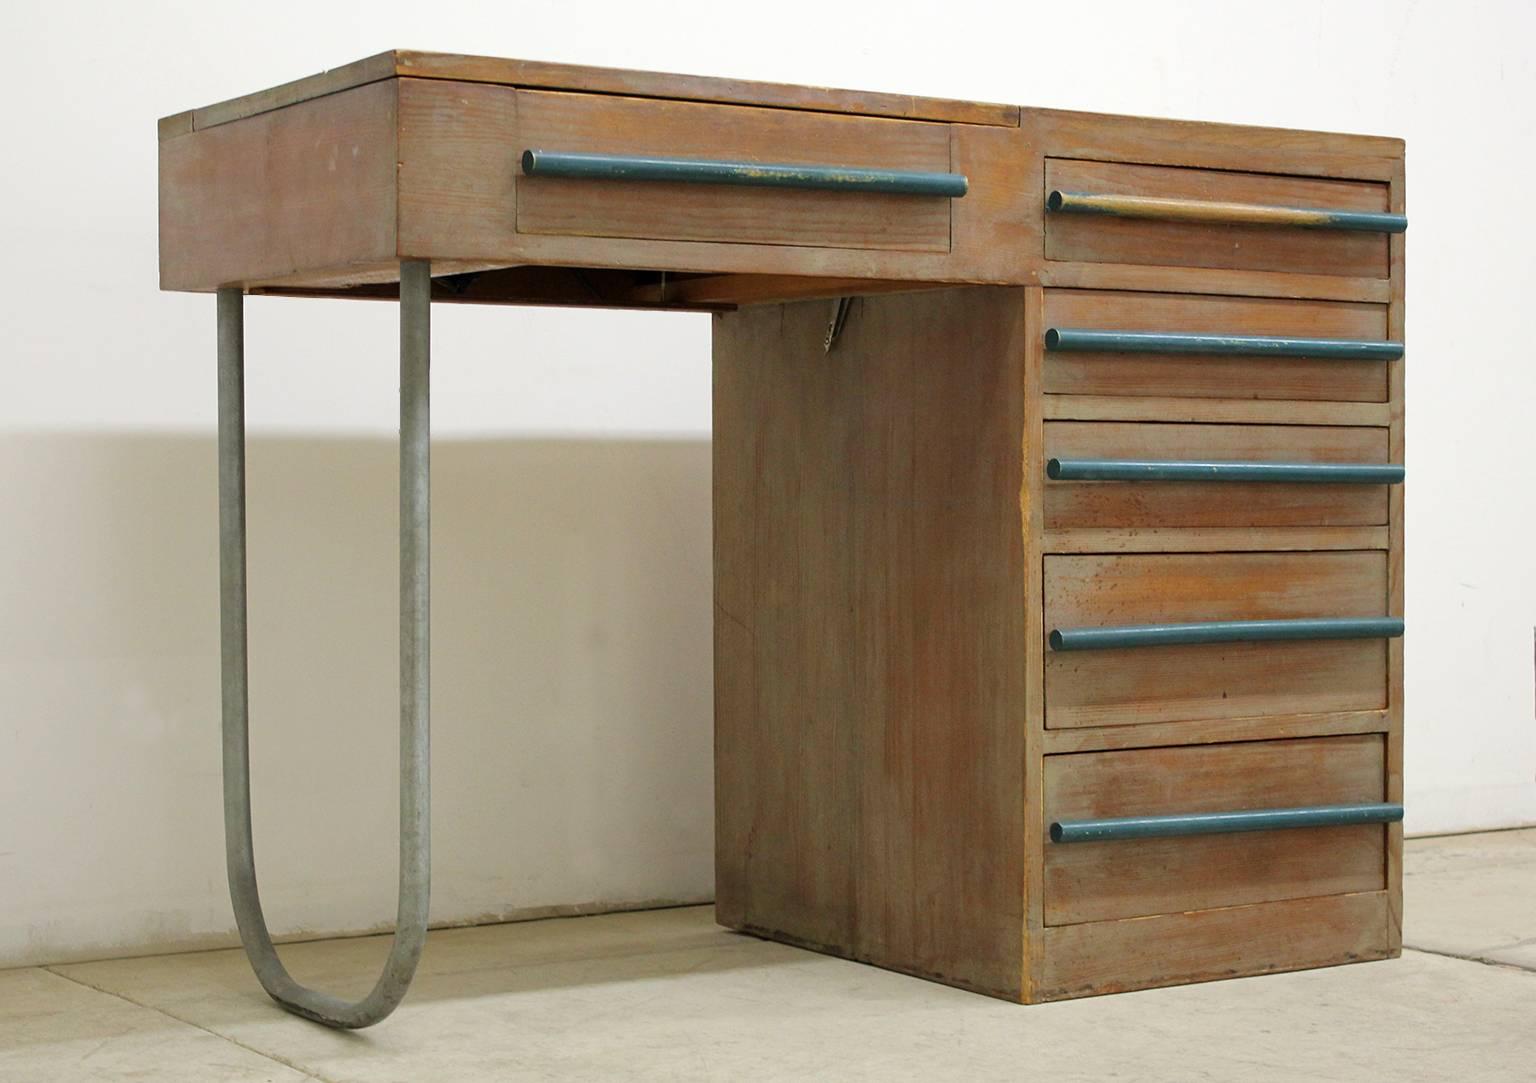 One of a kind handmade 1940s modernist desk of solid redwood construction with lighted vanity mirror. Purposefully left in all-original condition with overall wear as pictured. Additional images on request.